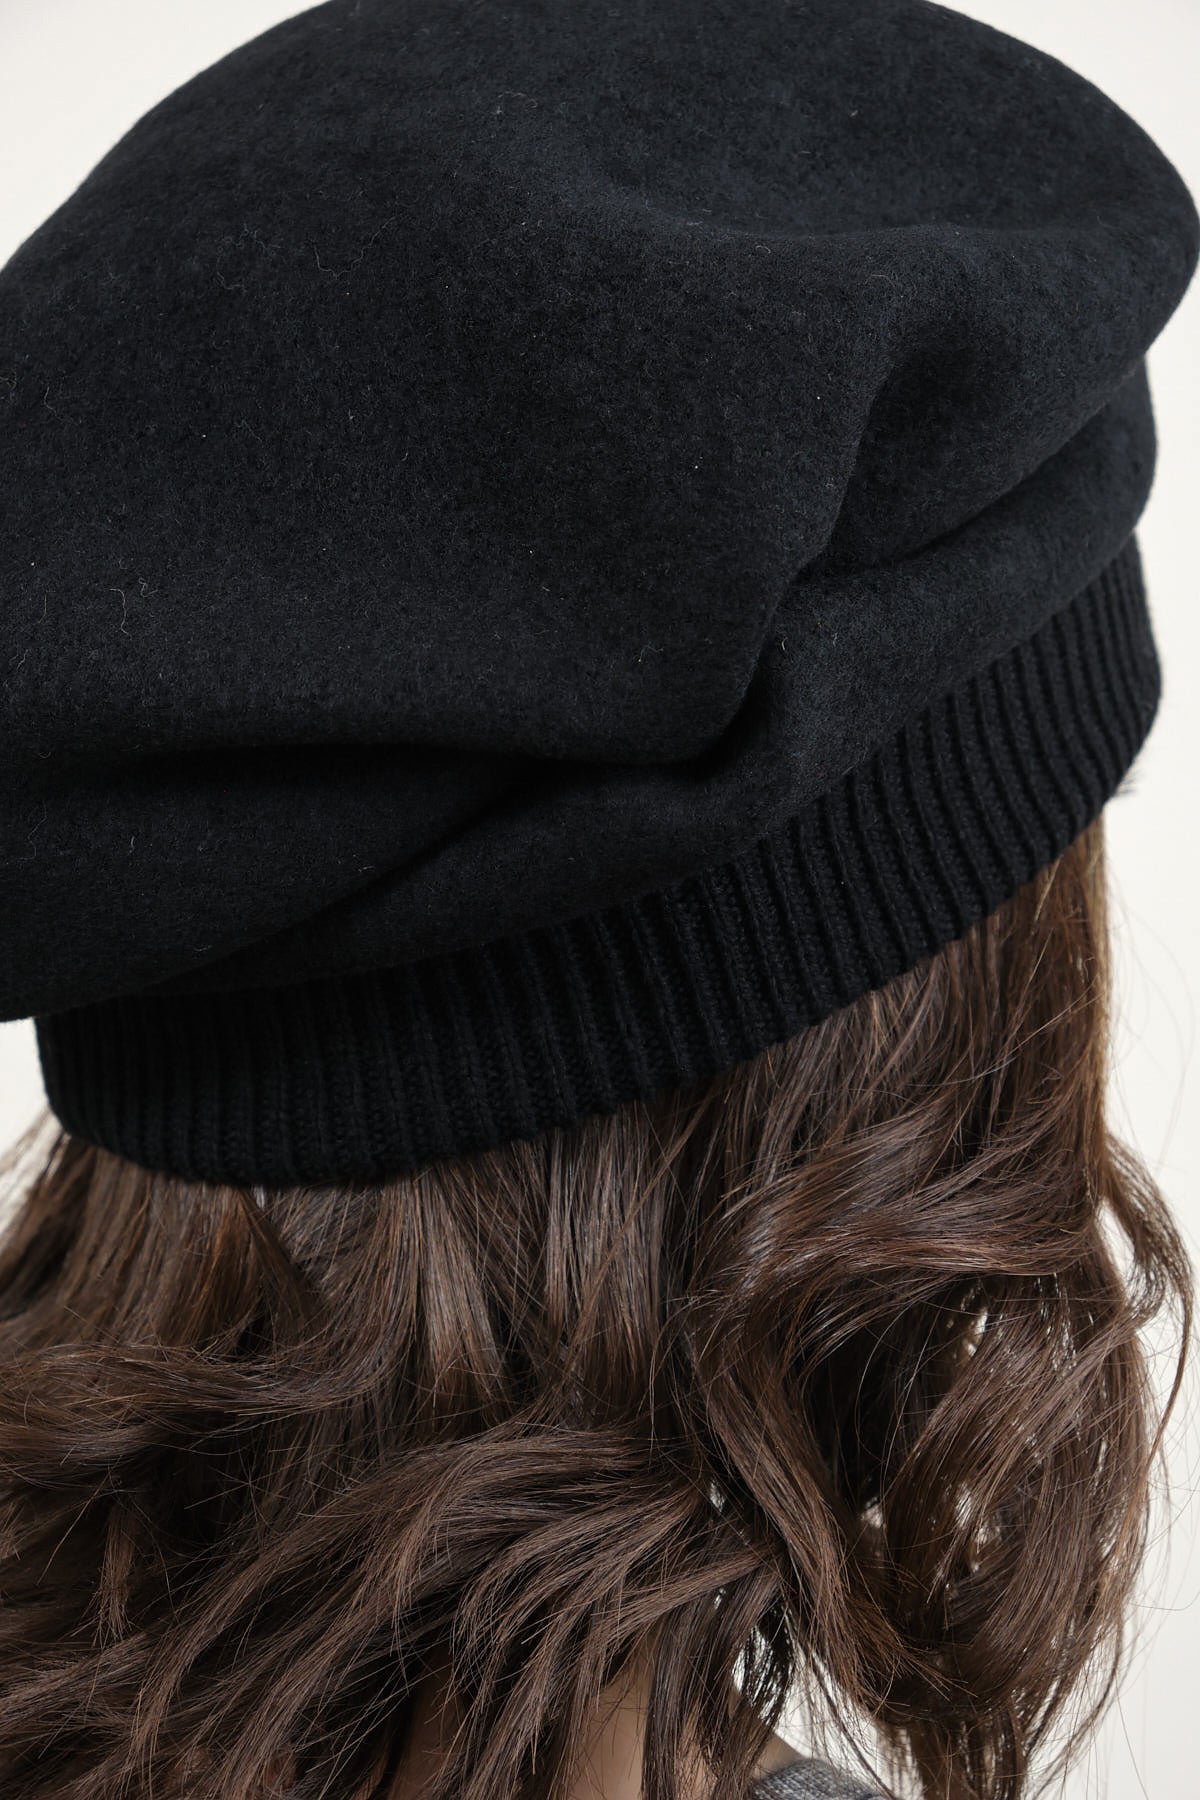 Detailing on Tuck and Gather Beret